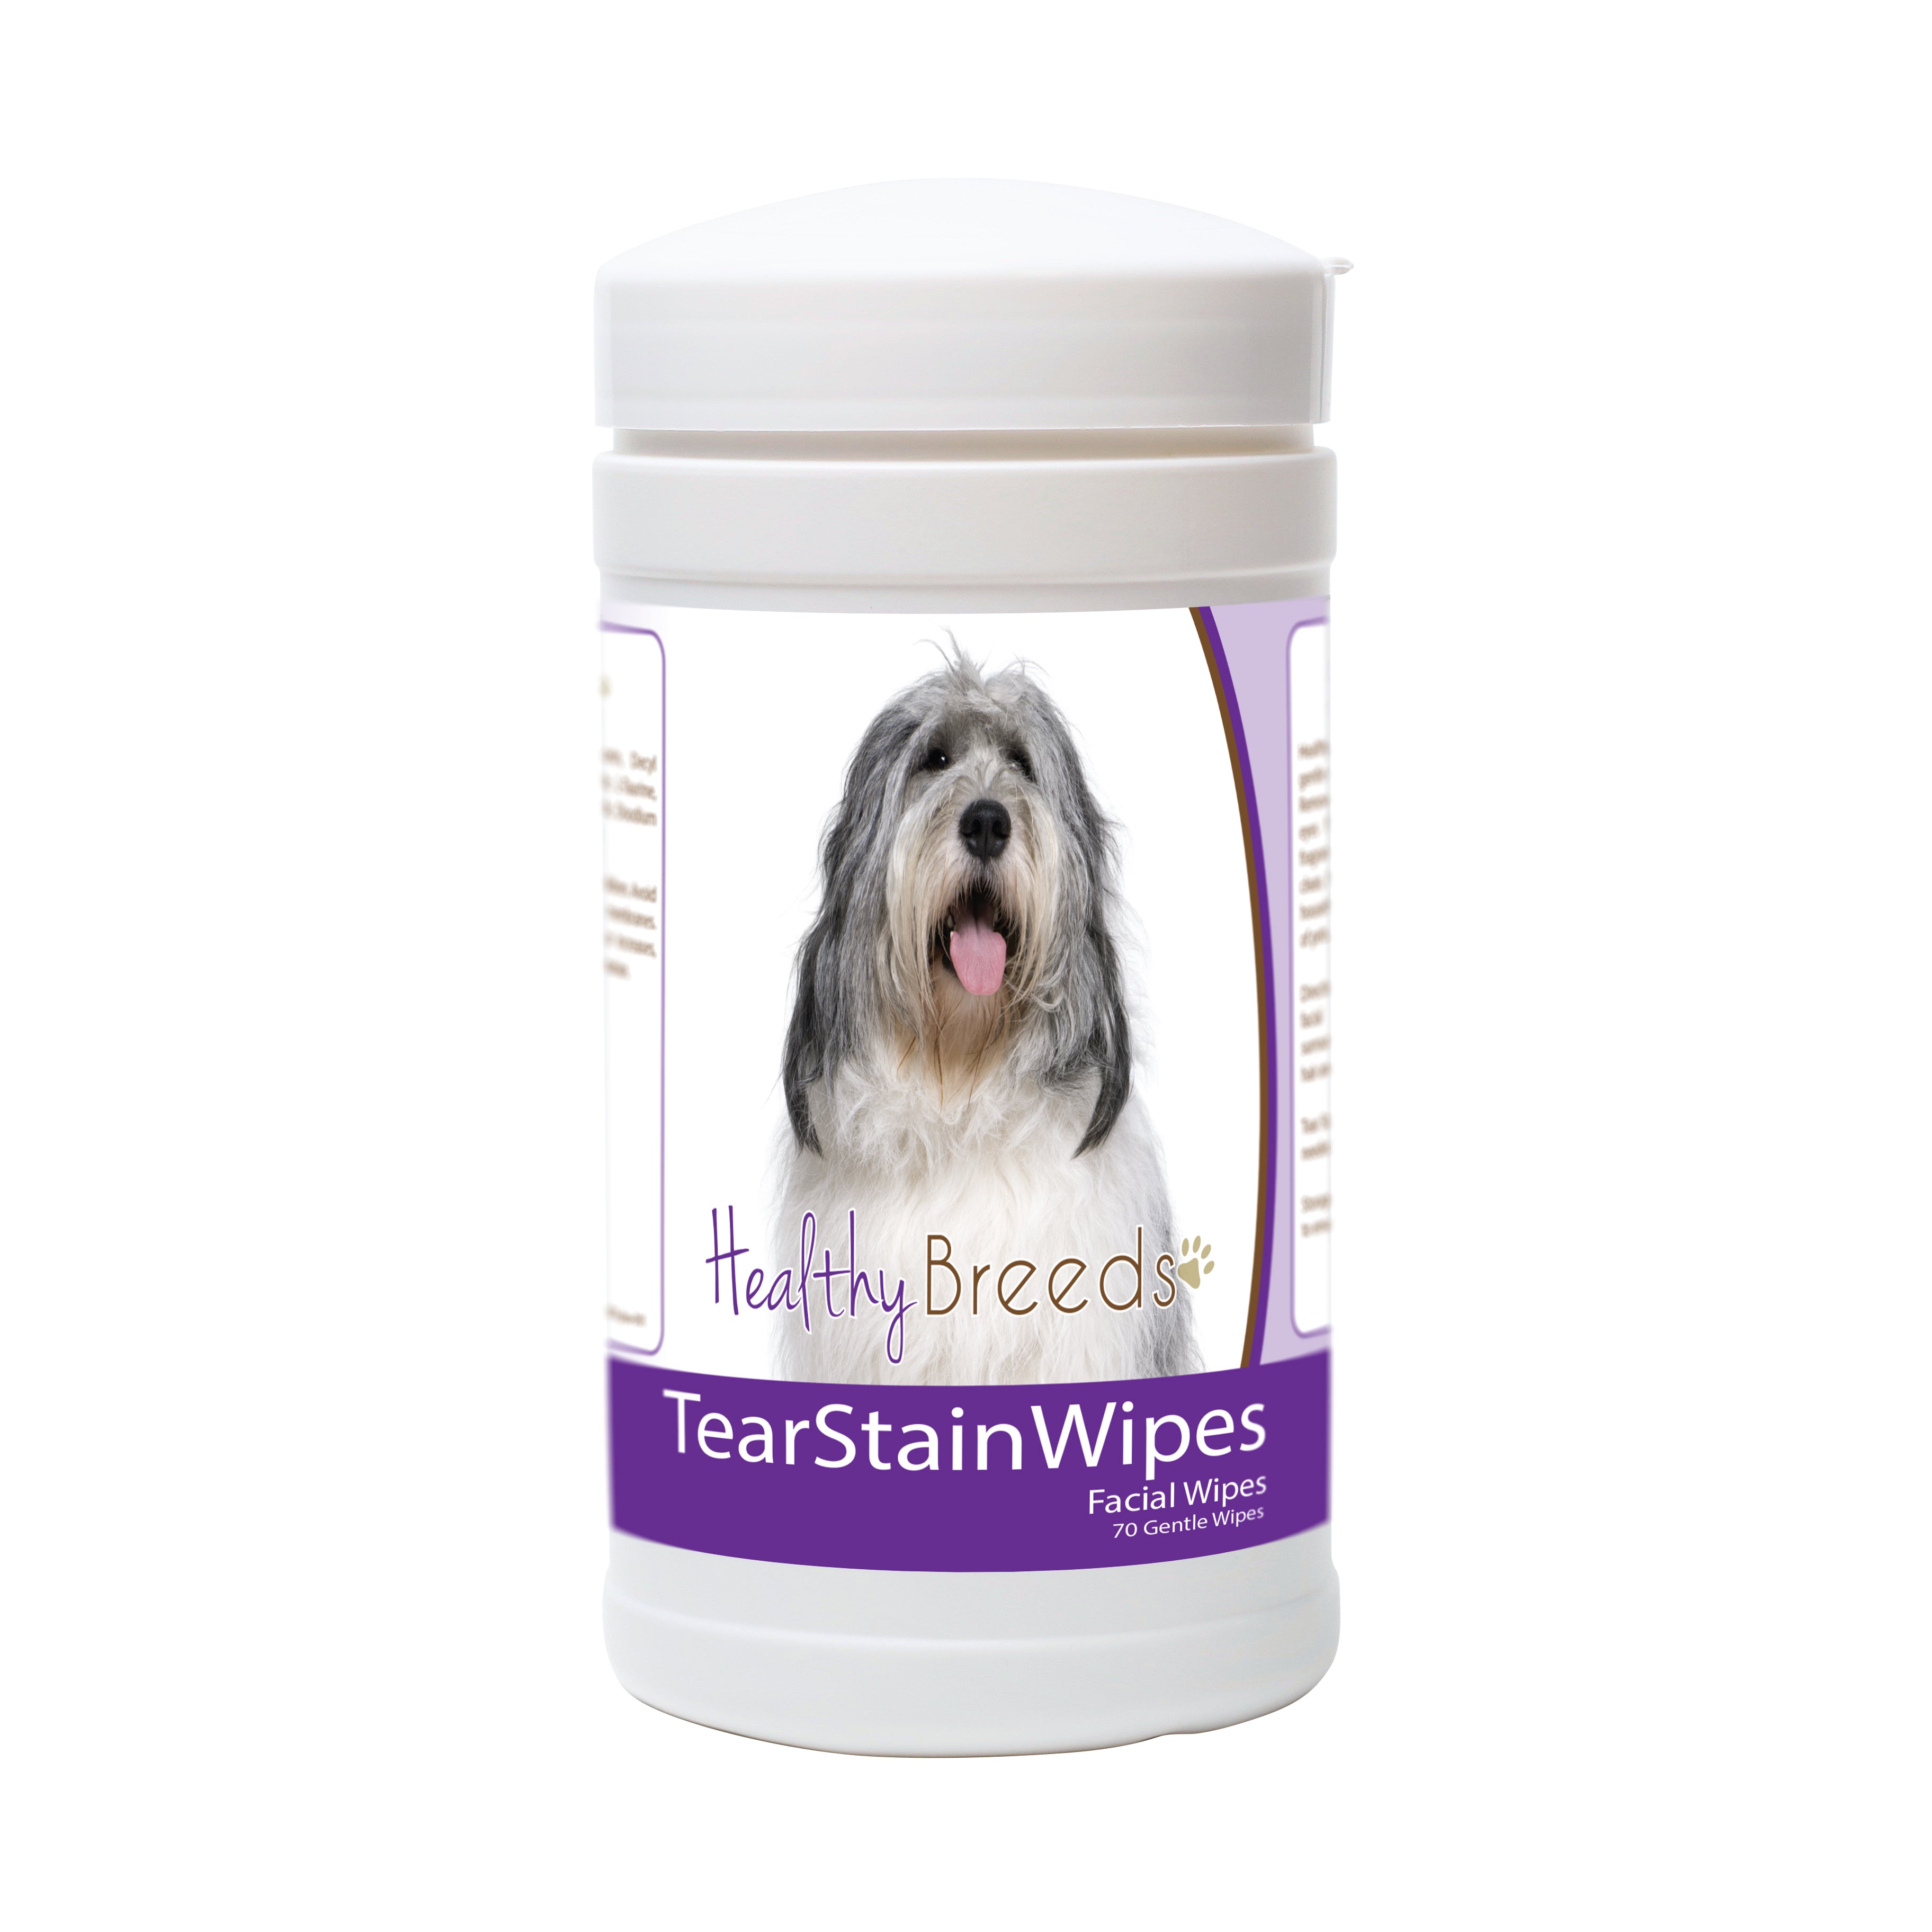 Polish Lowland Sheepdog Tear Stain Wipes 70 Count